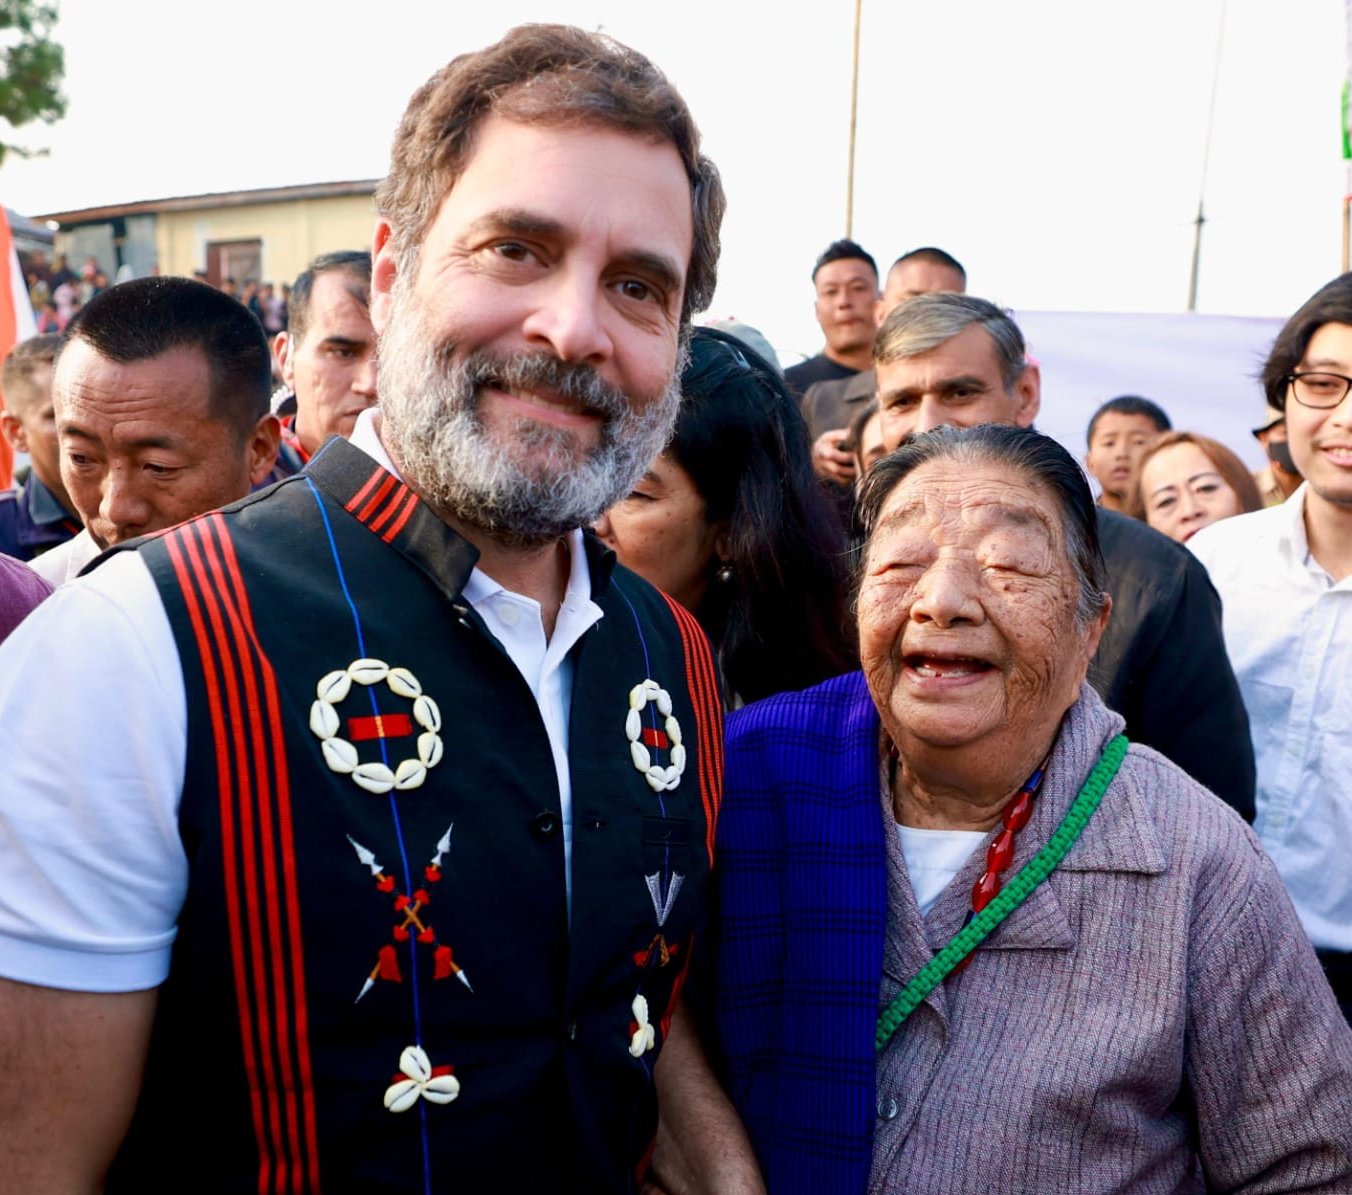 Rahul Gandhi criticises PM Modi's inaction on Naga political issues in Nagaland